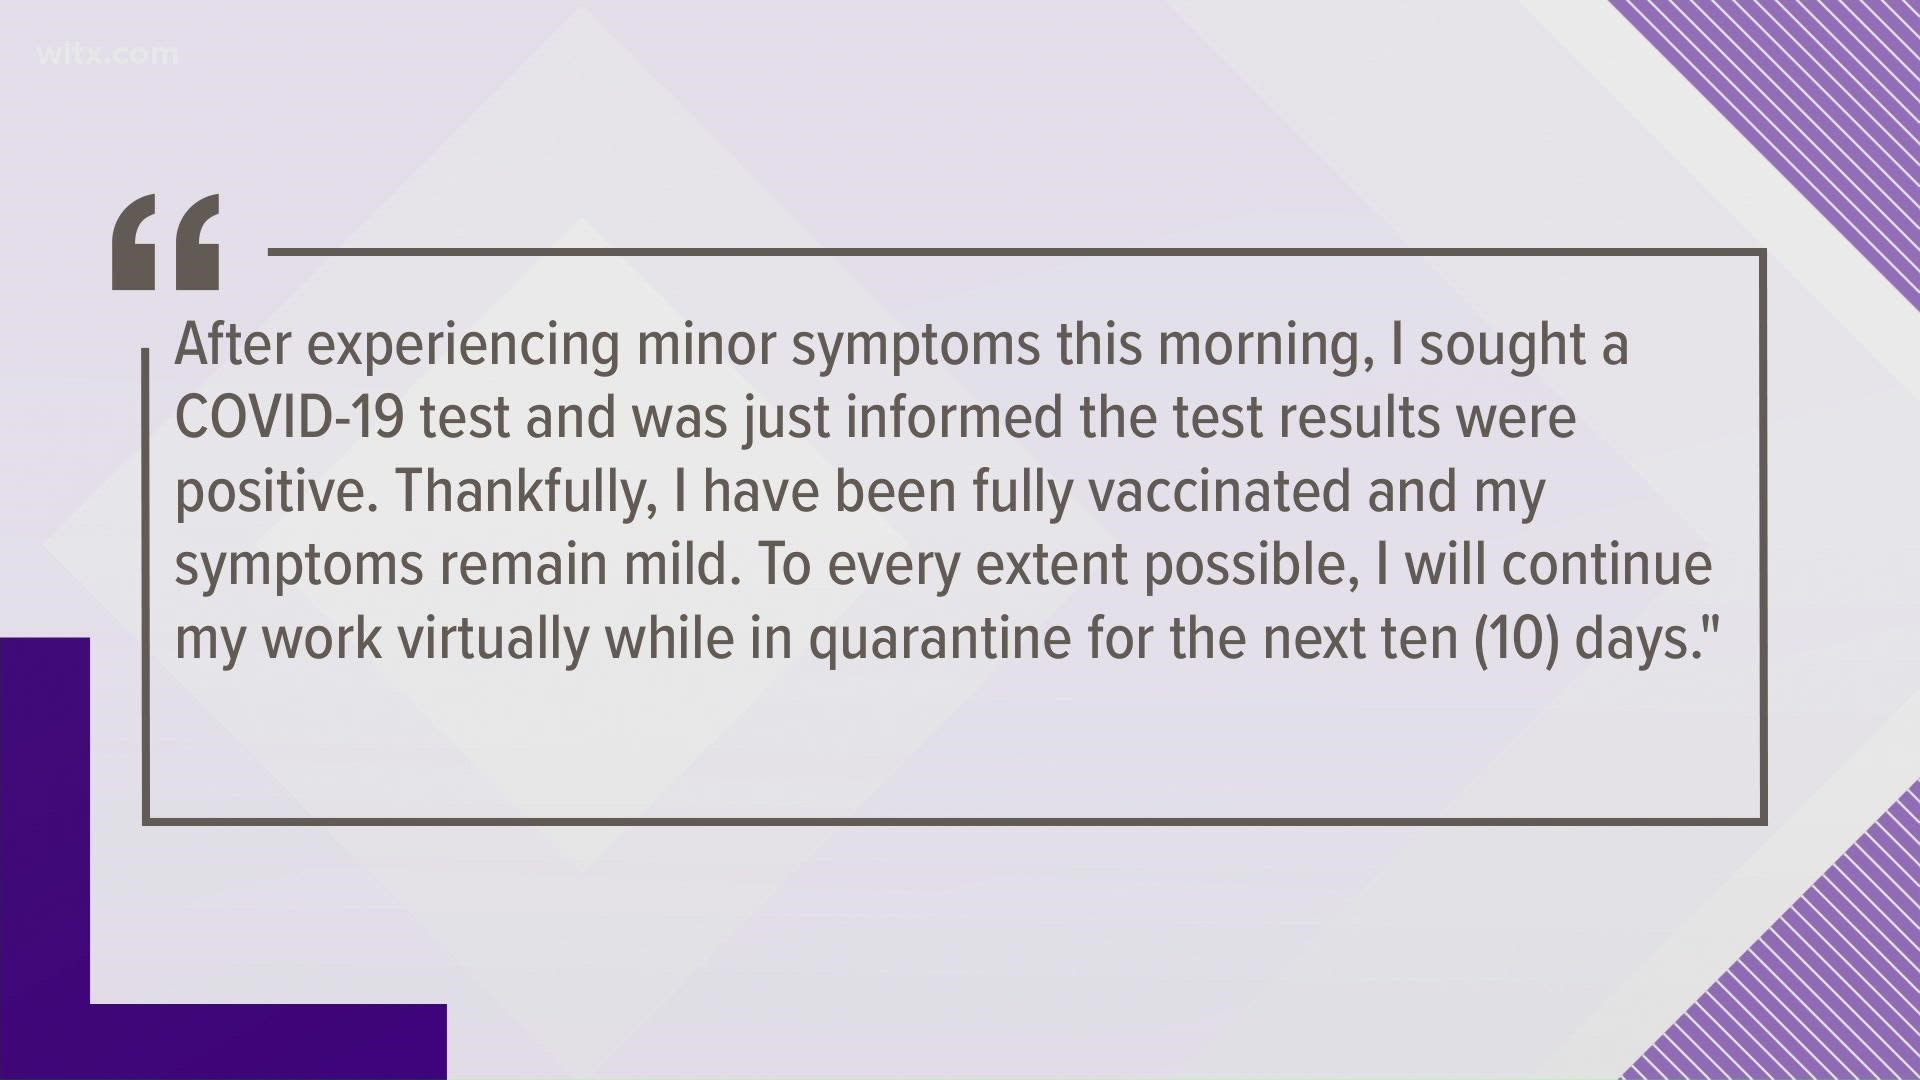 He issued a statement saying he had minor symptoms and was glad that he was fully vaccinated.